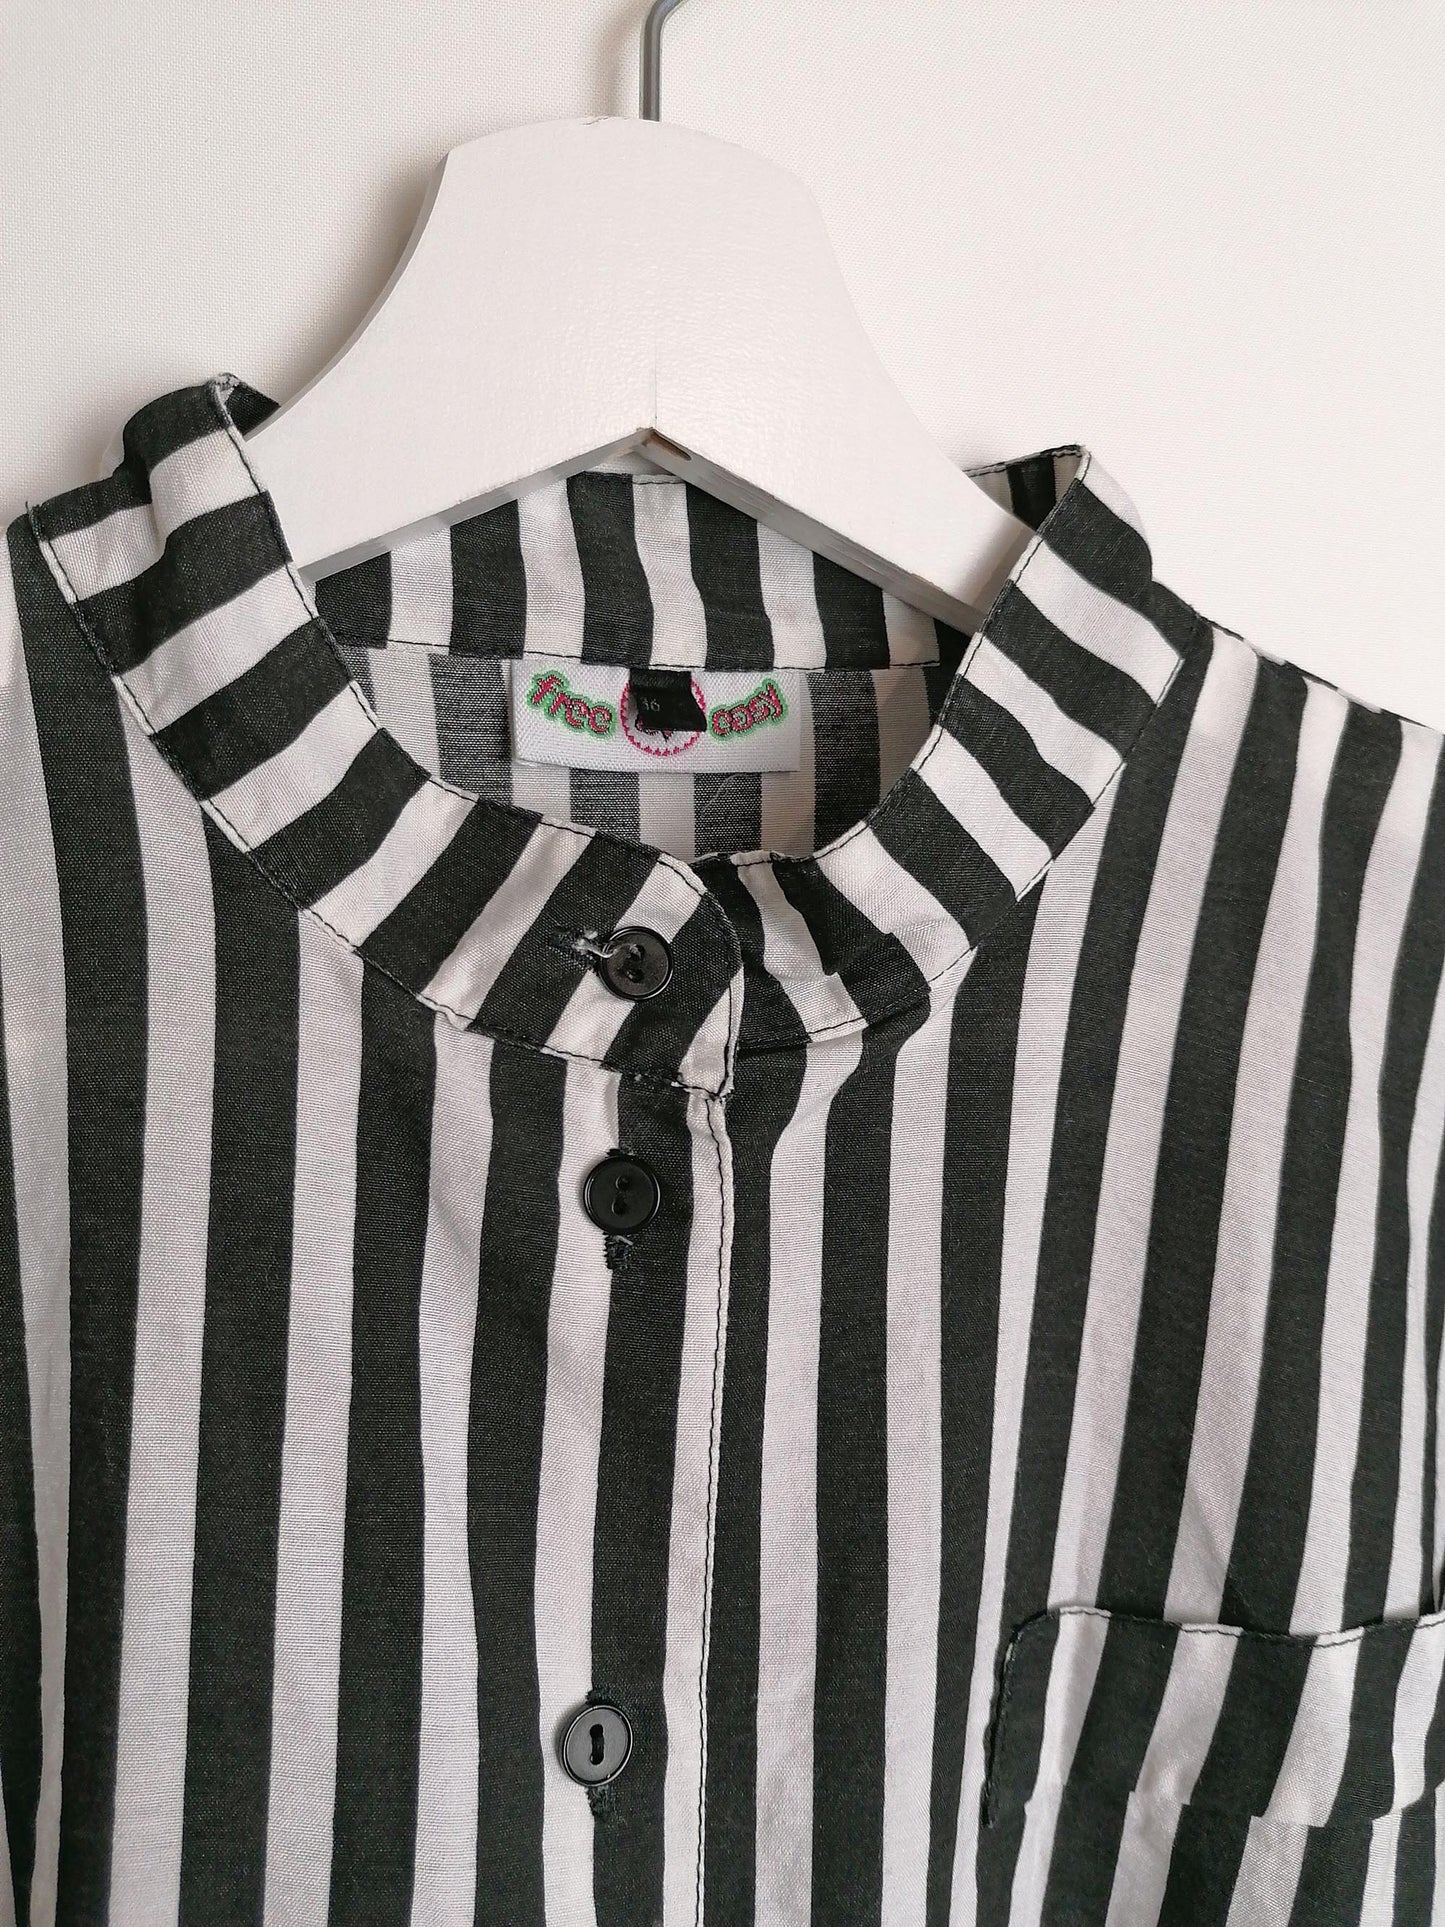 80's 90's Boxy Cropped Blouse Vertical Stripes - size S-M